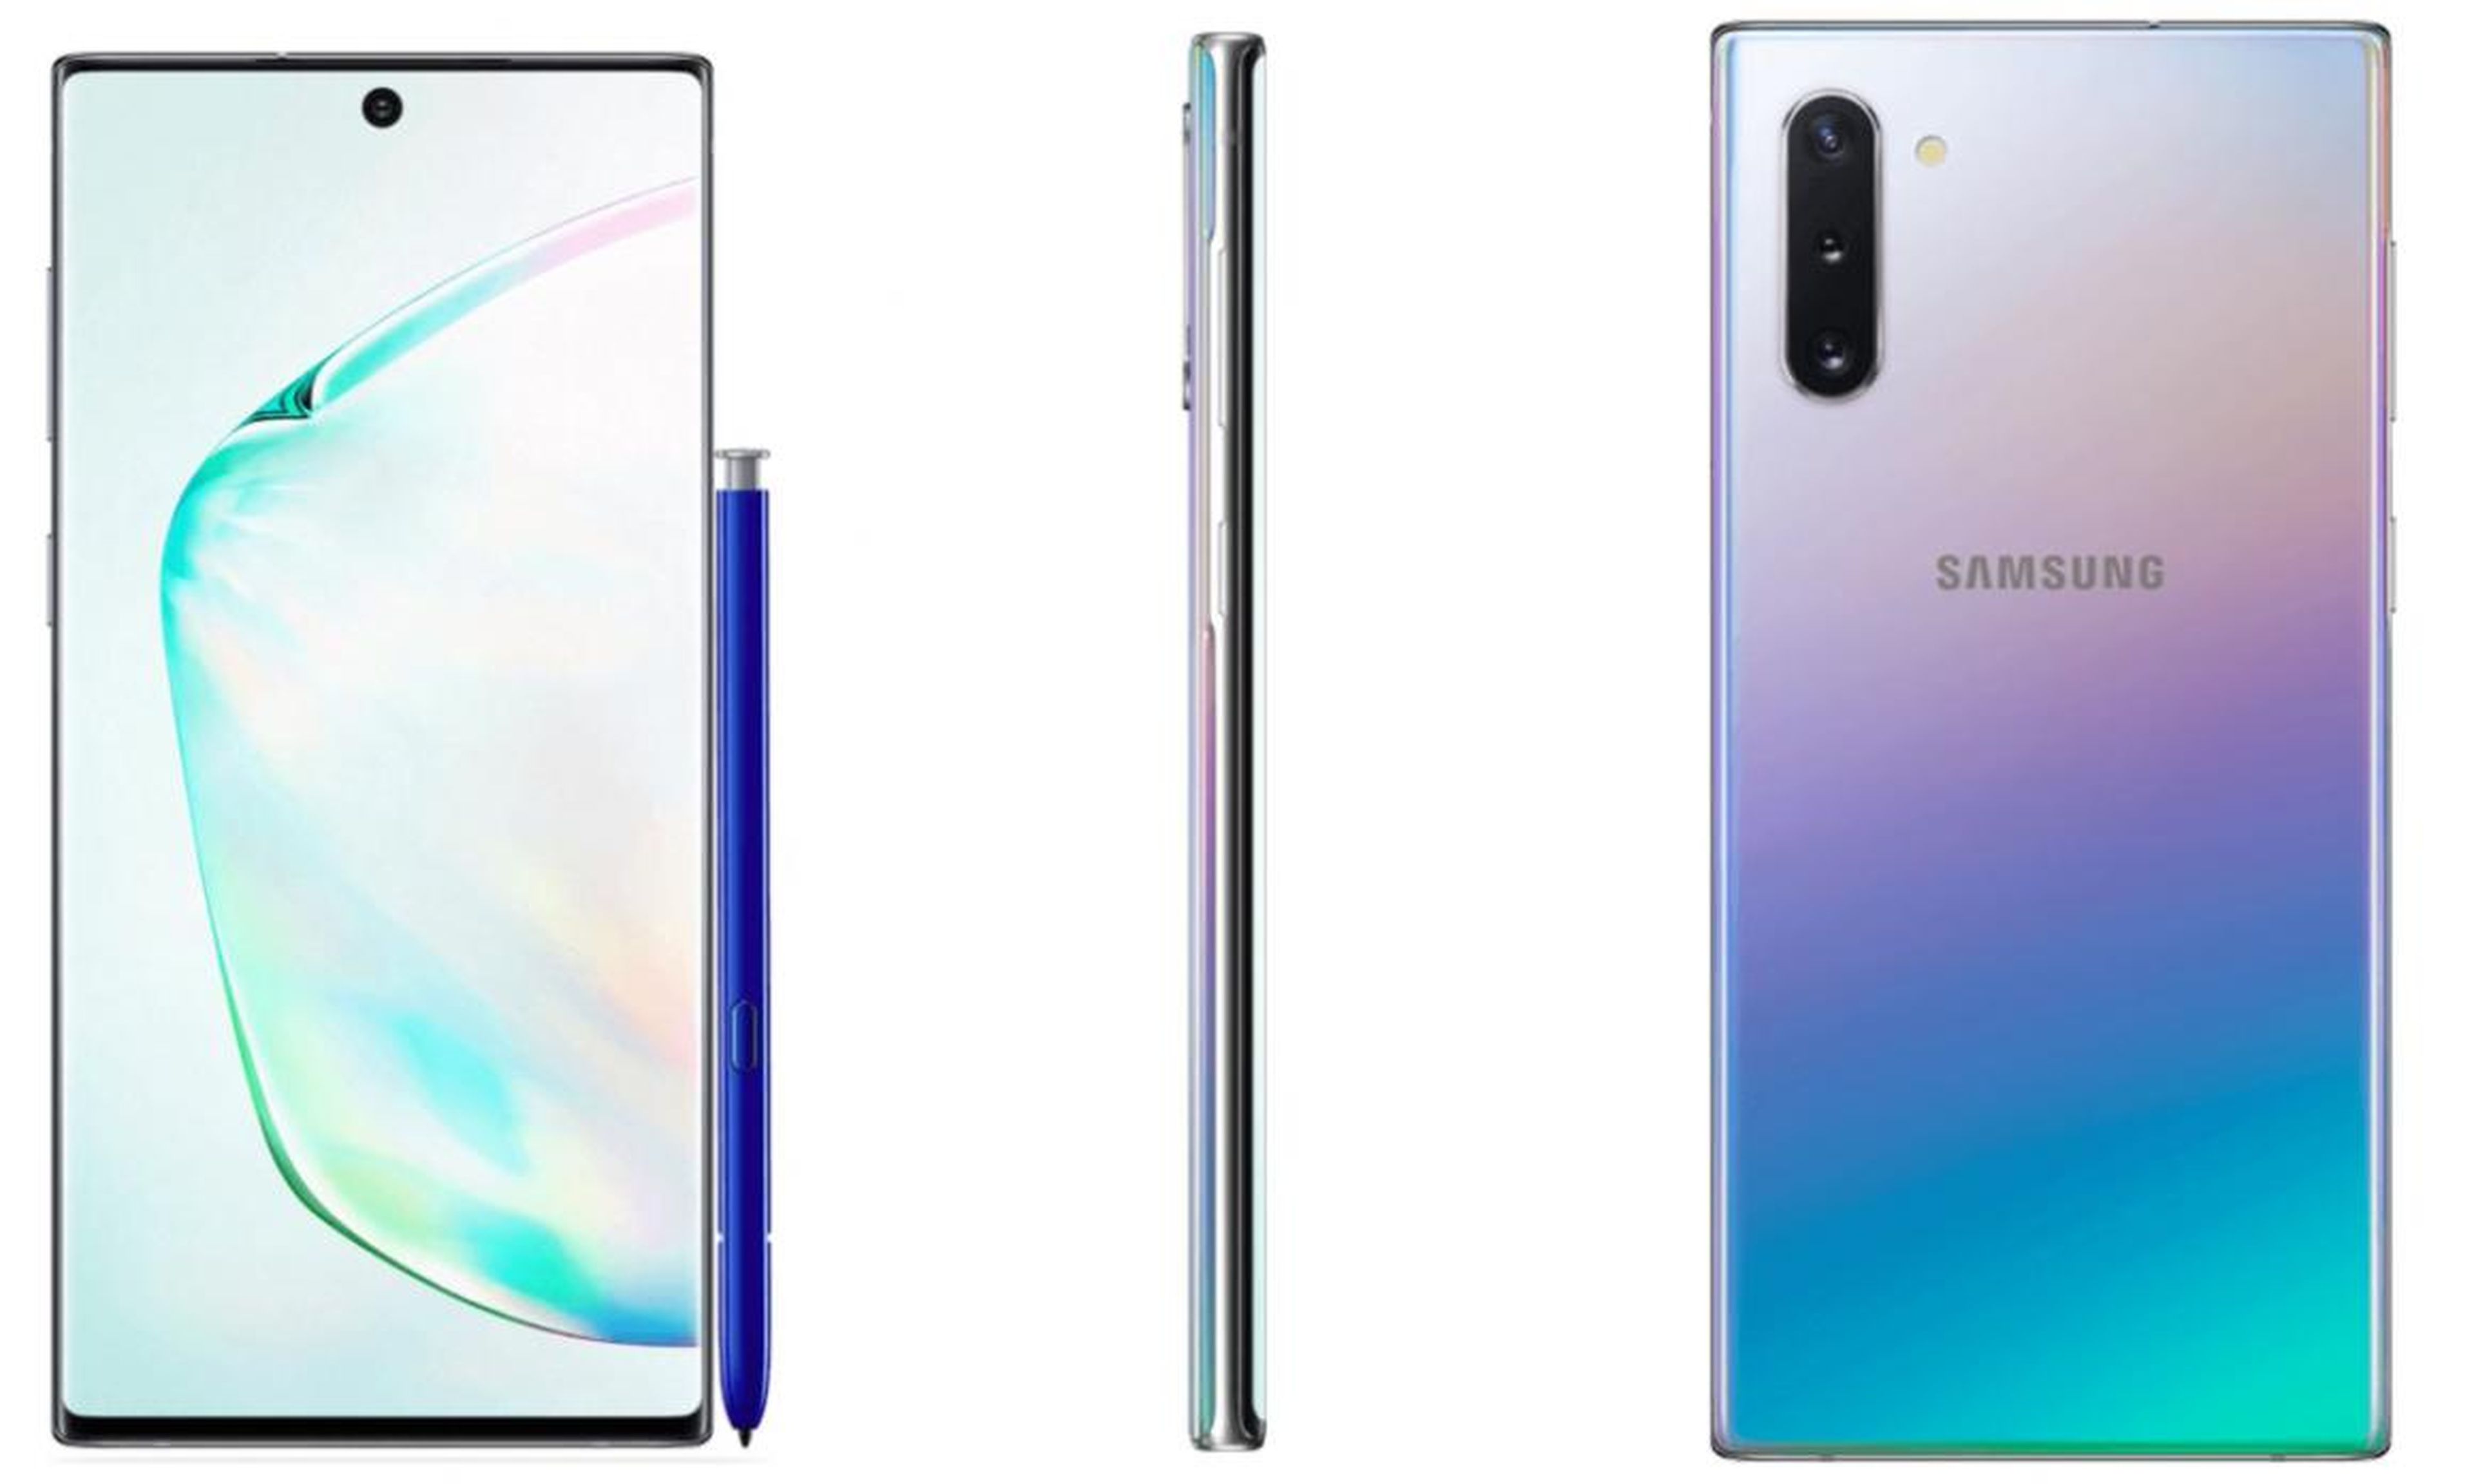 We're expecting a clean and gorgeous design for the Galaxy Note 10, which reportedly has an in-display fingerprint sensor, a triple-lens camera system, and the same "Infinity O" OLED screen as the Galaxy S10, with the same hole